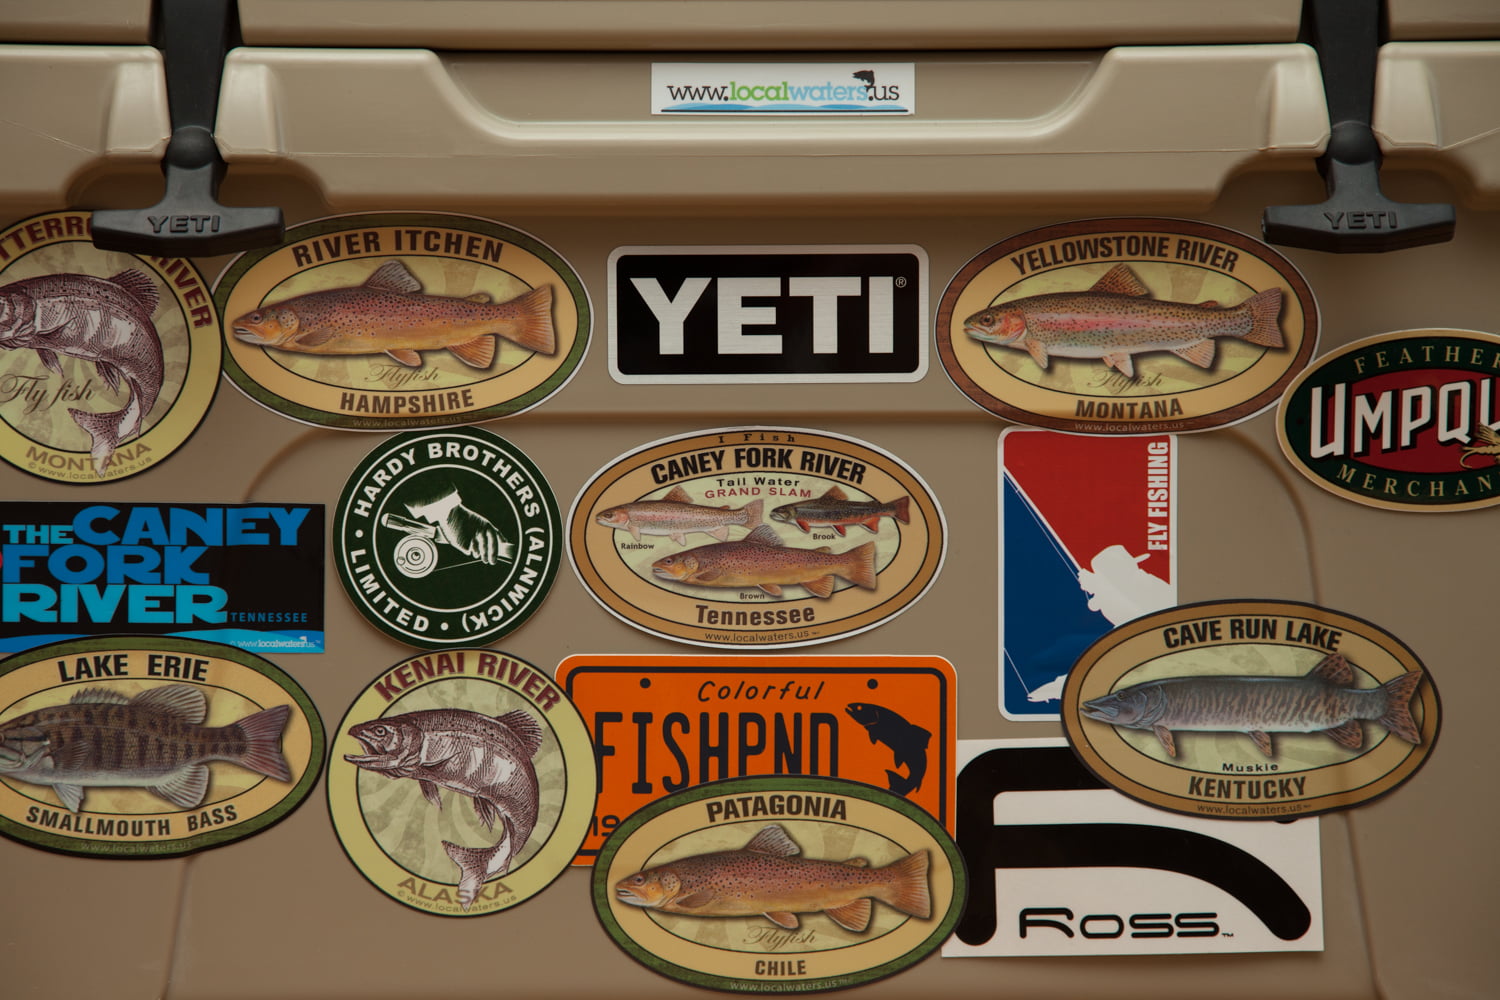 https://www.localwaters.us/wp-content/uploads/2014/06/Yeti_cooler_1500.jpg